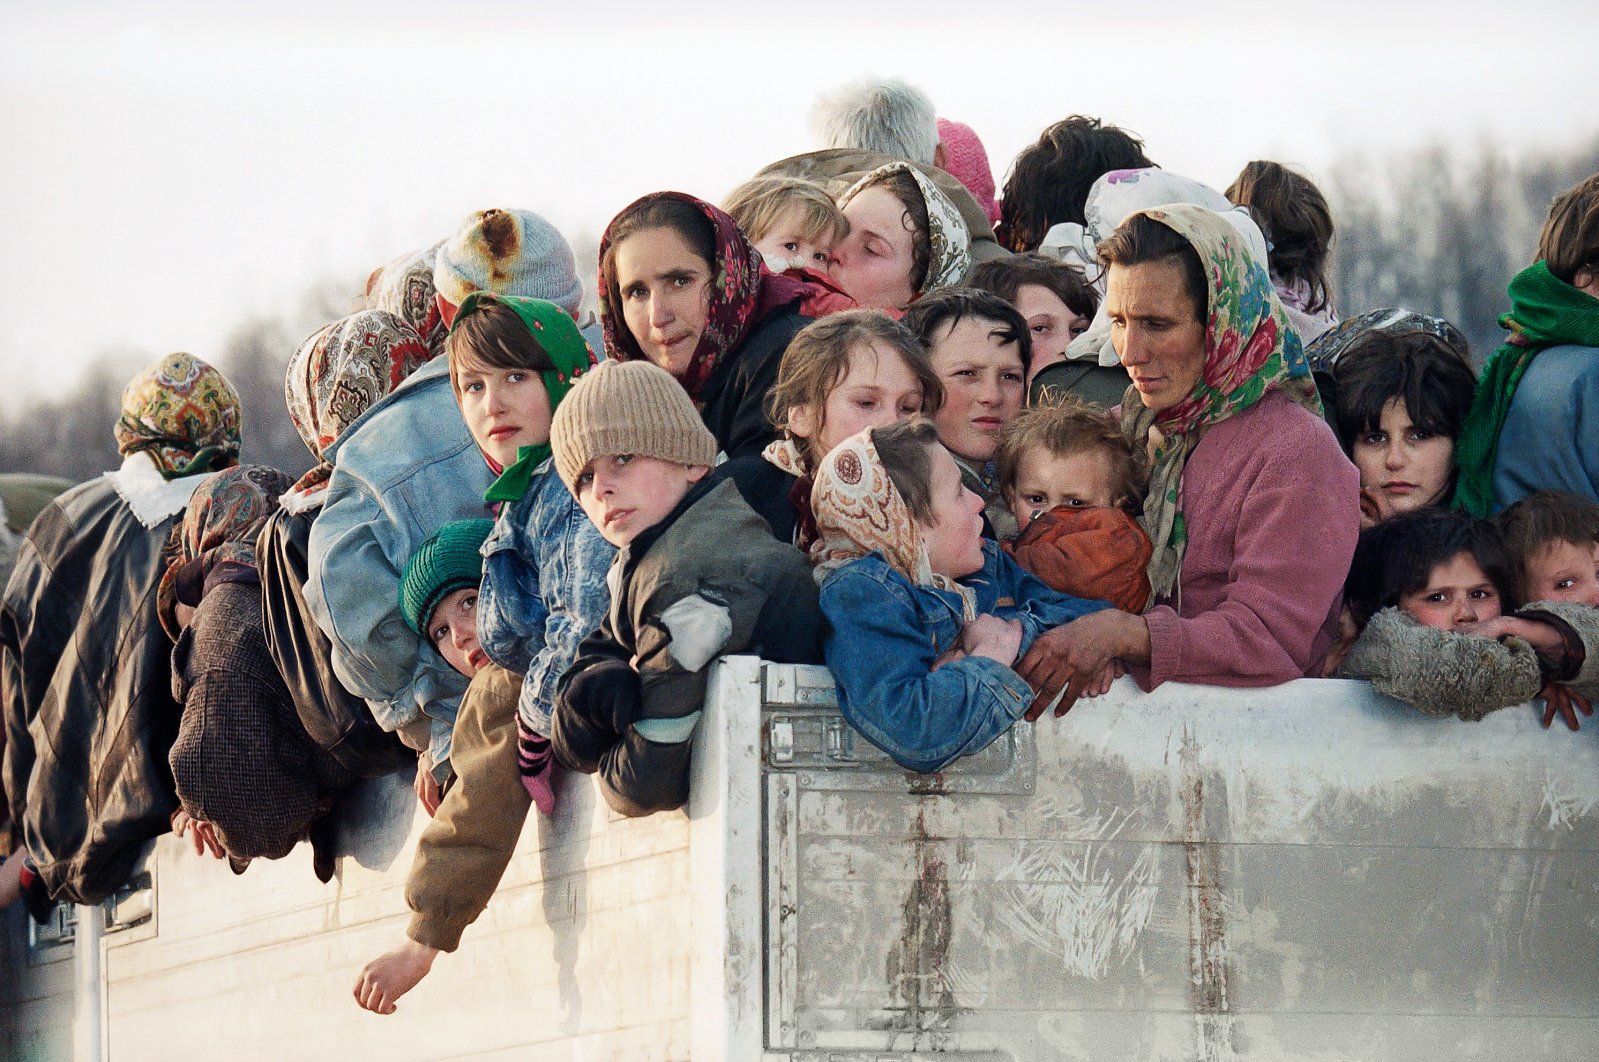 Evacuees from the besieged Muslim enclave of Srebrenica, packed on a truck en route to Bosnian city of Tuzla, pass through the Tojsici village, March 29, 1993. (AP Photo)